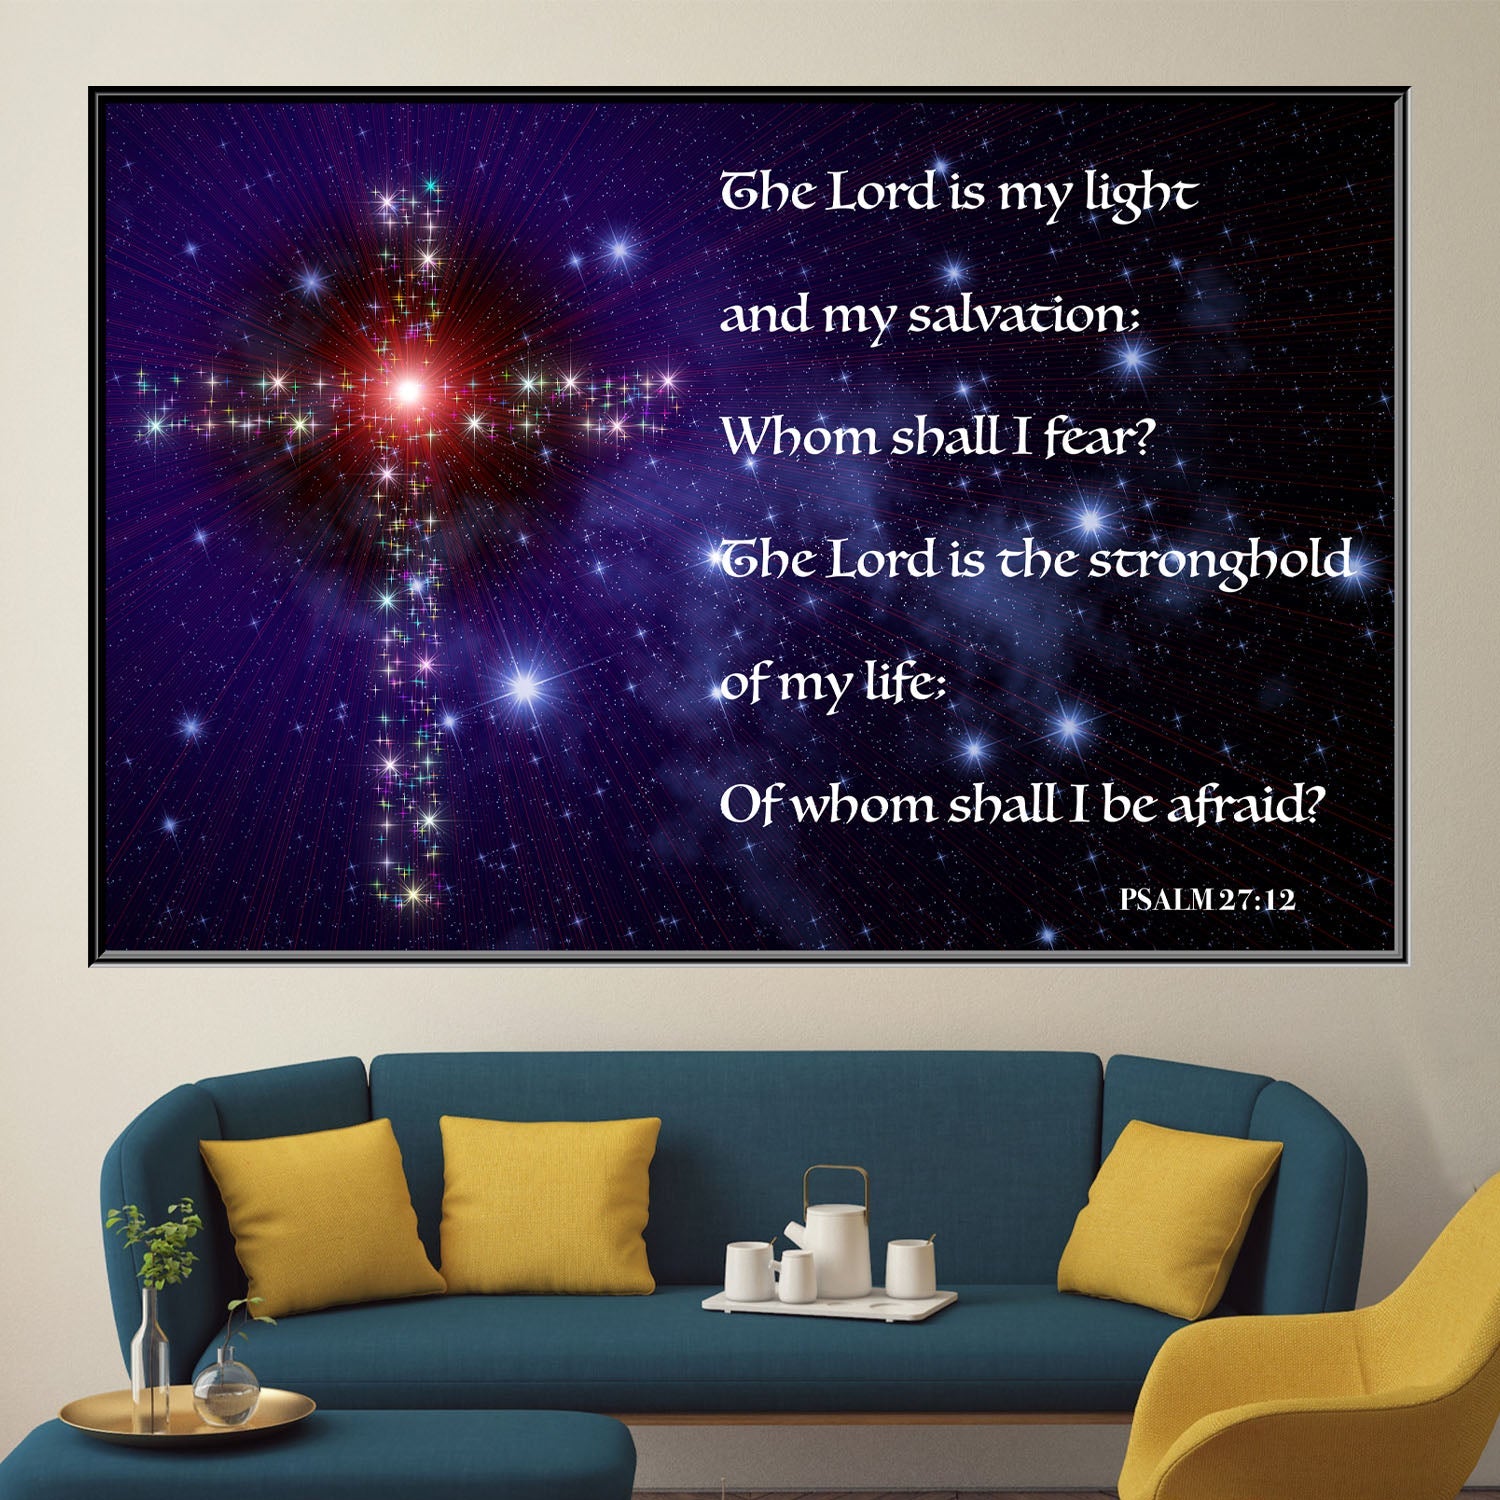 https://cdn.shopify.com/s/files/1/0387/9986/8044/products/TheLordismyLightCanvasArtprintStretched-4.jpg